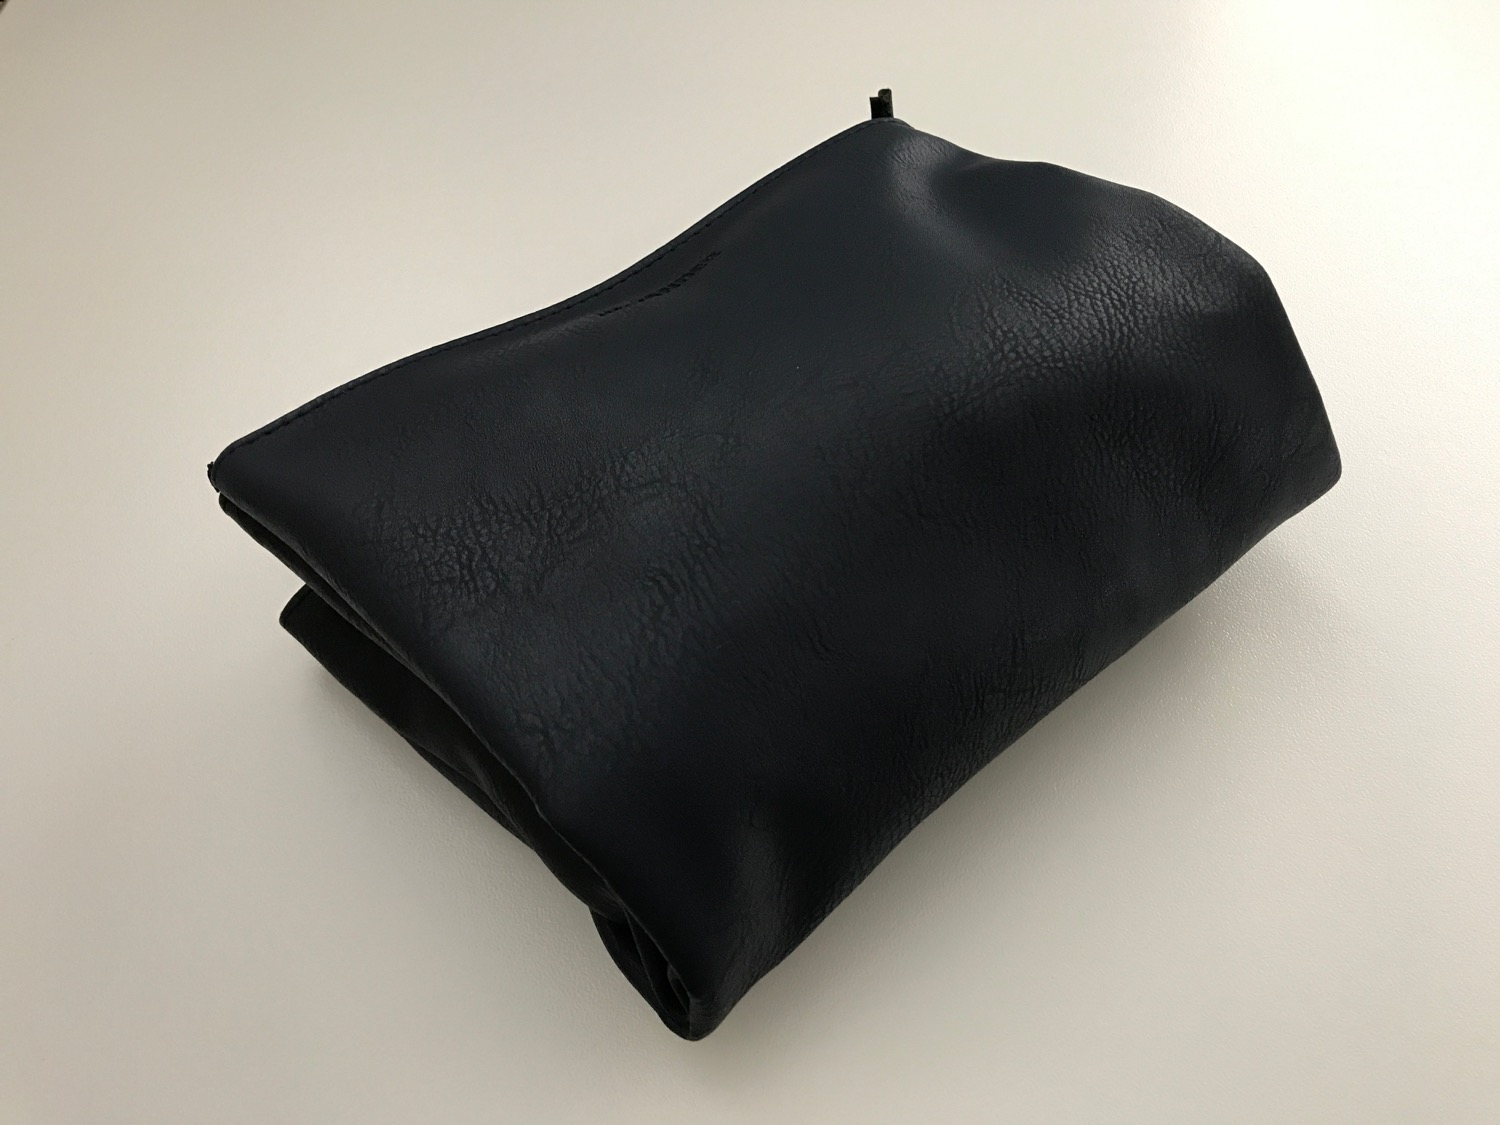 a black leather bag on a white surface